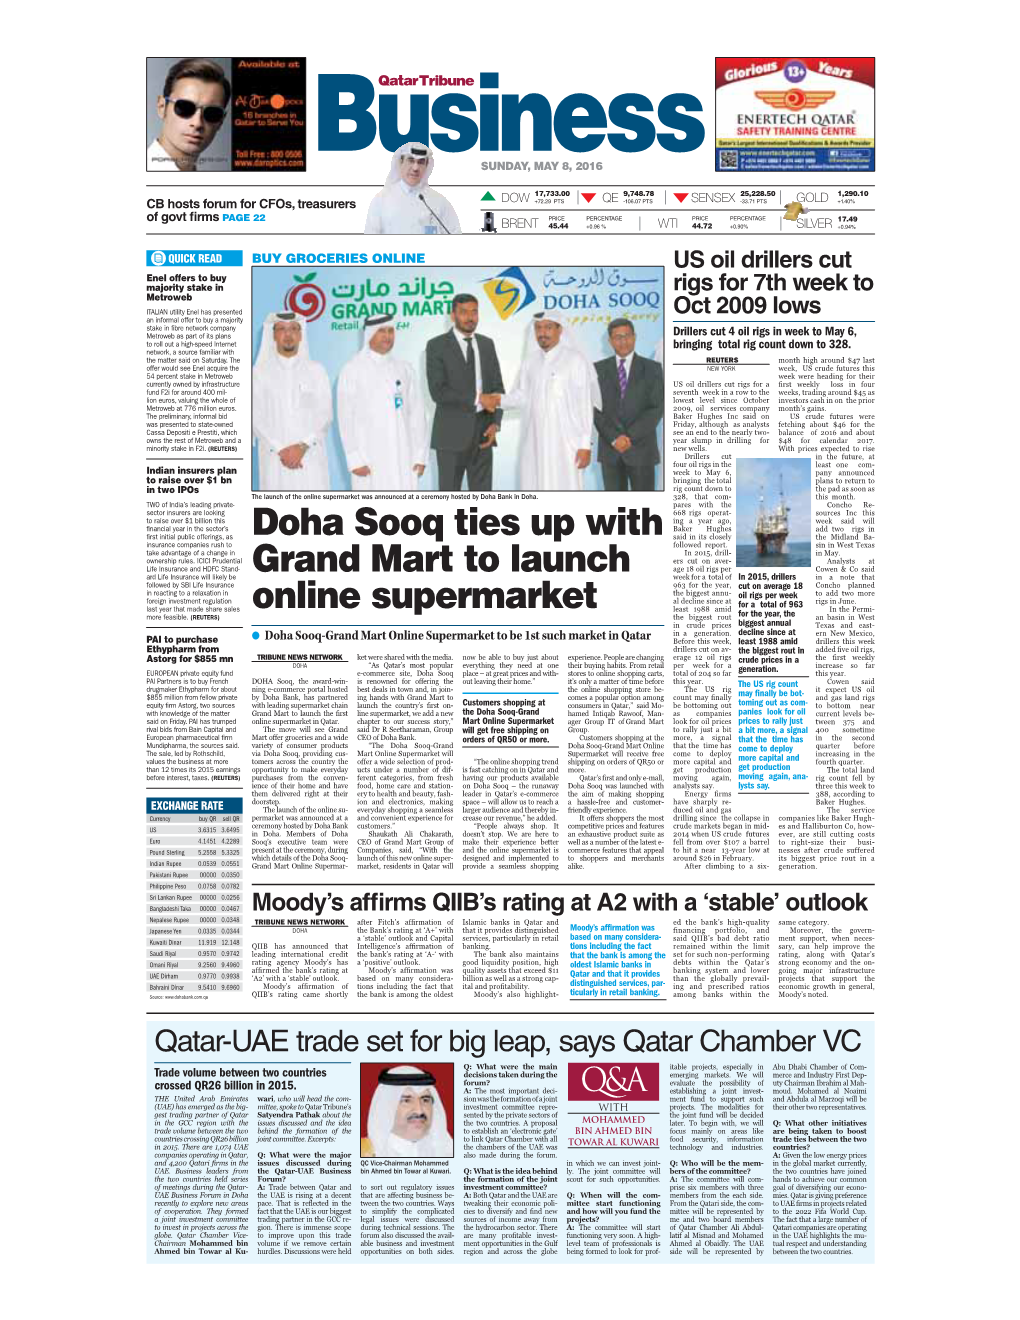 Doha Sooq Ties up with Grand Mart to Launch Online Supermarket